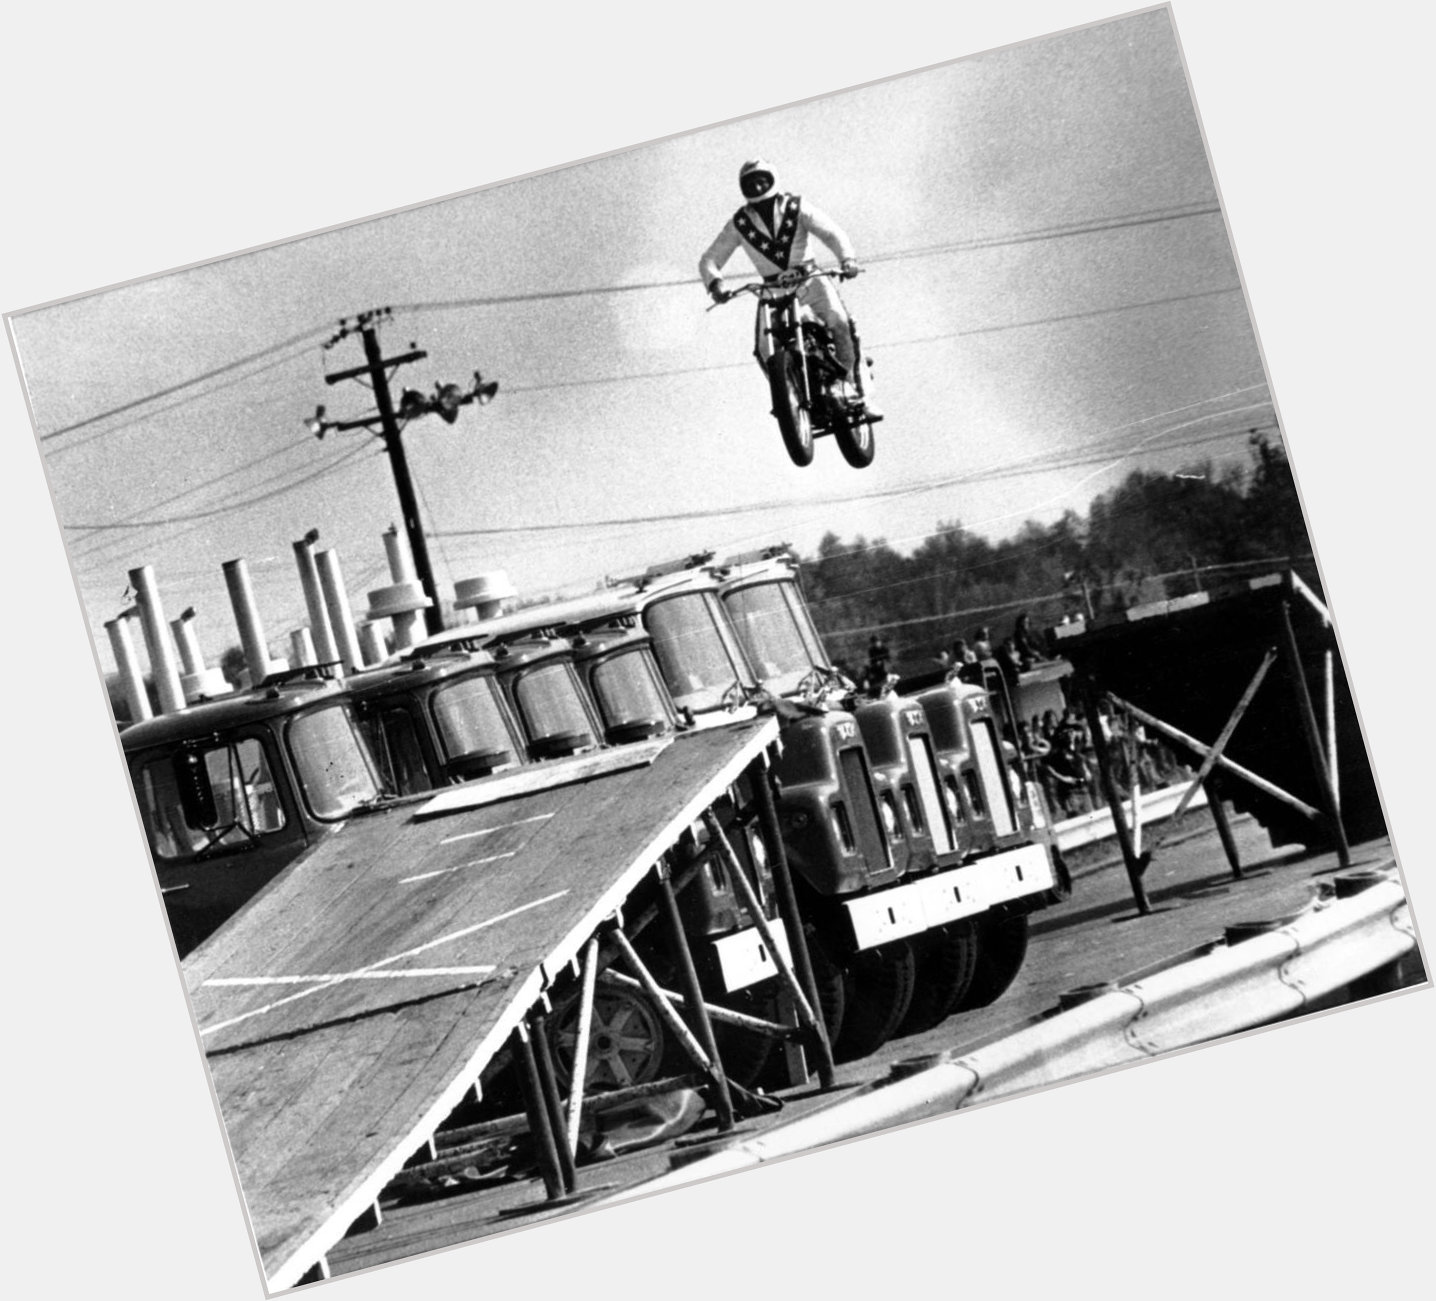 Room Rater Happy Birthday in Memoriam. Evel Knievel was born on this day in 1938. 